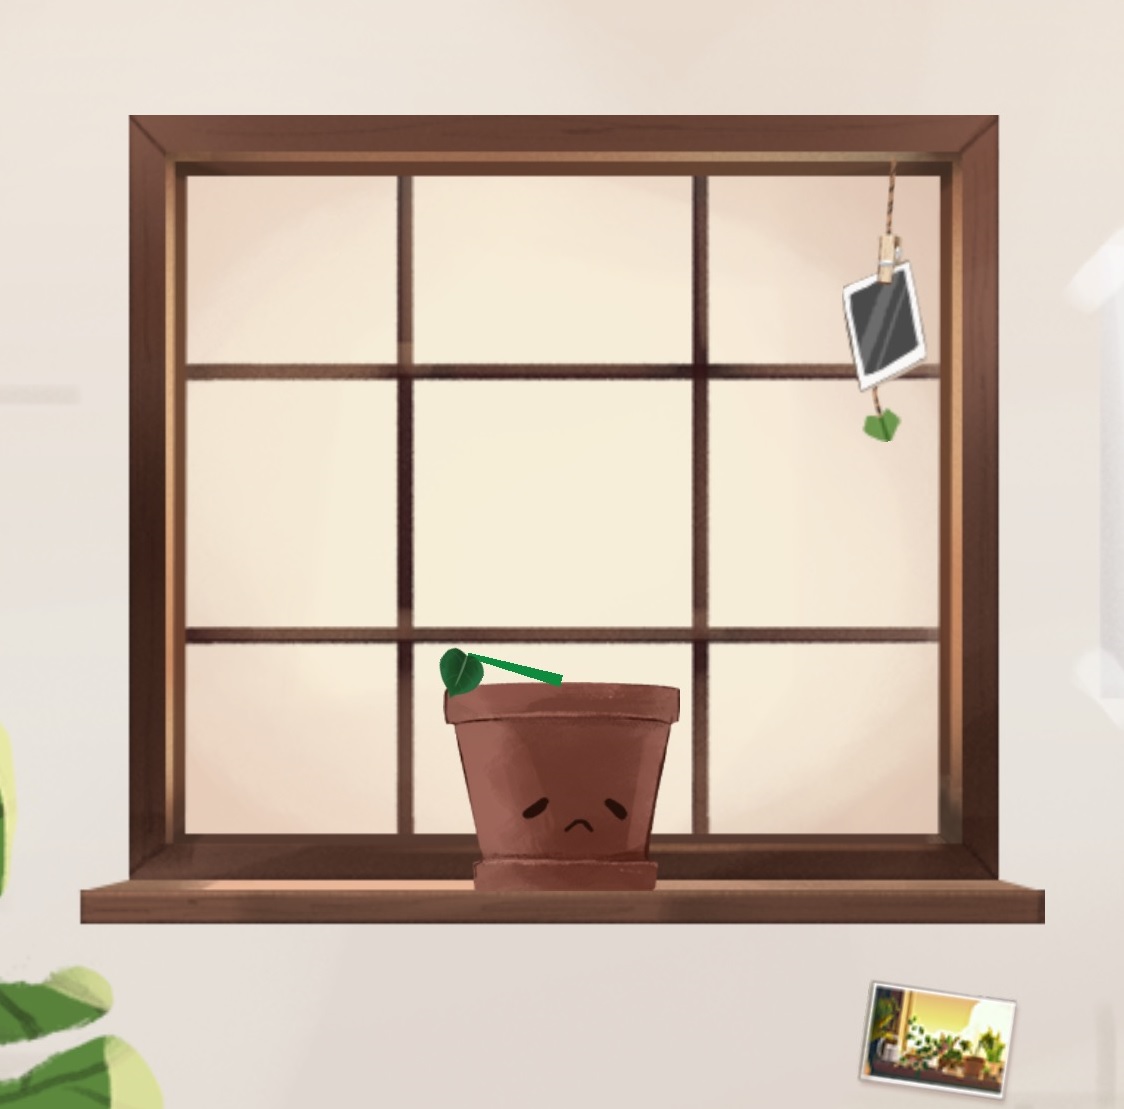 A plant frowns by the window. ("Kinder World." Lumi Interactive. 2021.)